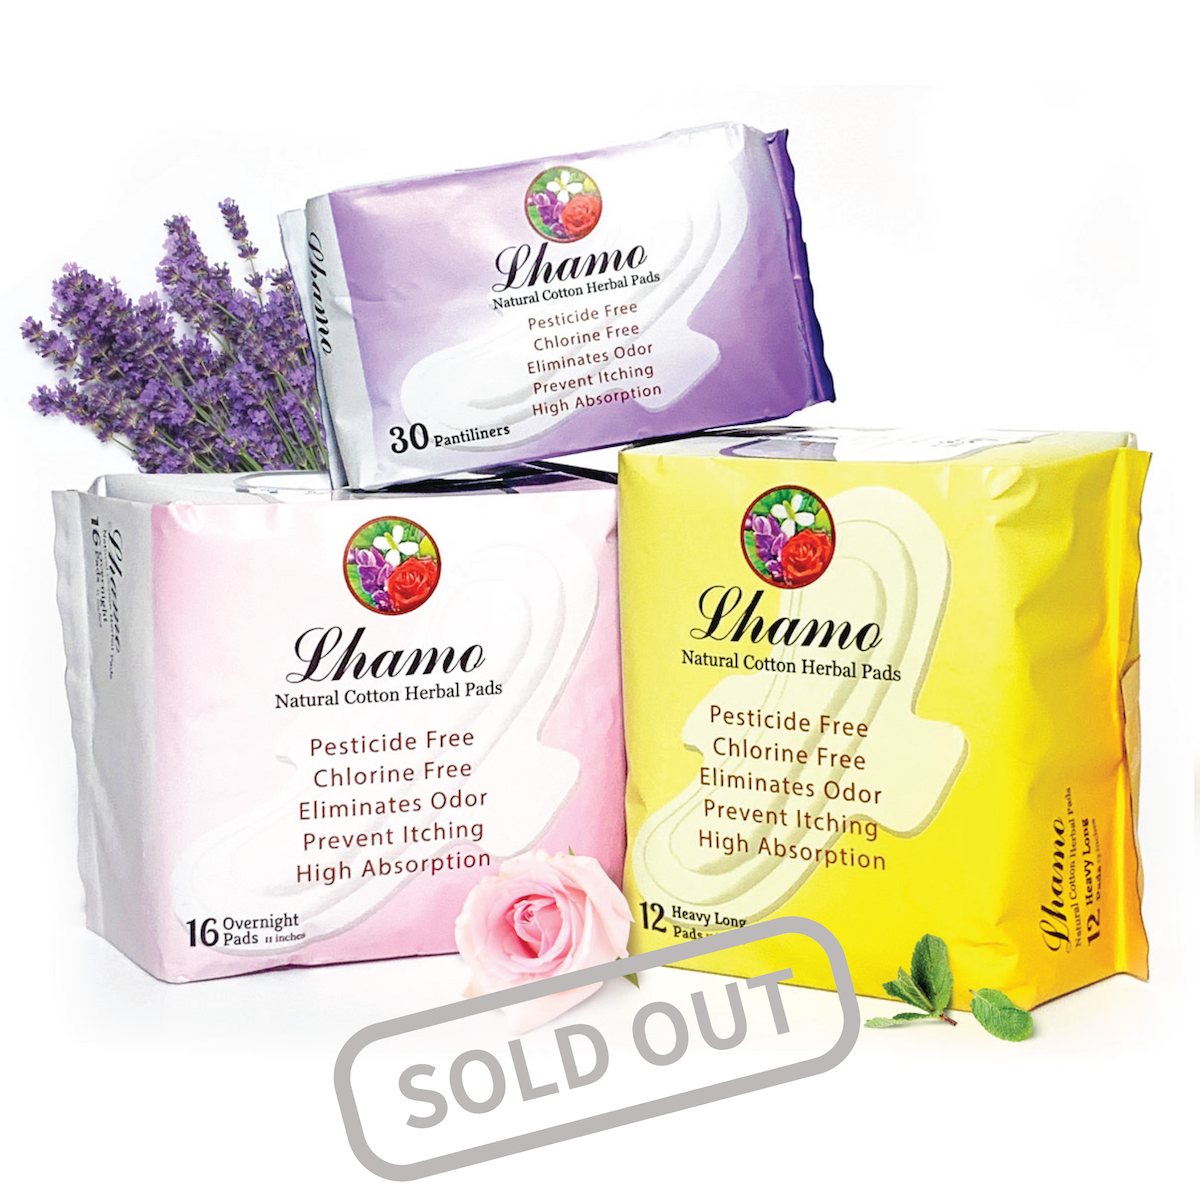 Heavy Flow Protection Set  Lhamo Herbal Infused Sanitary Napkin